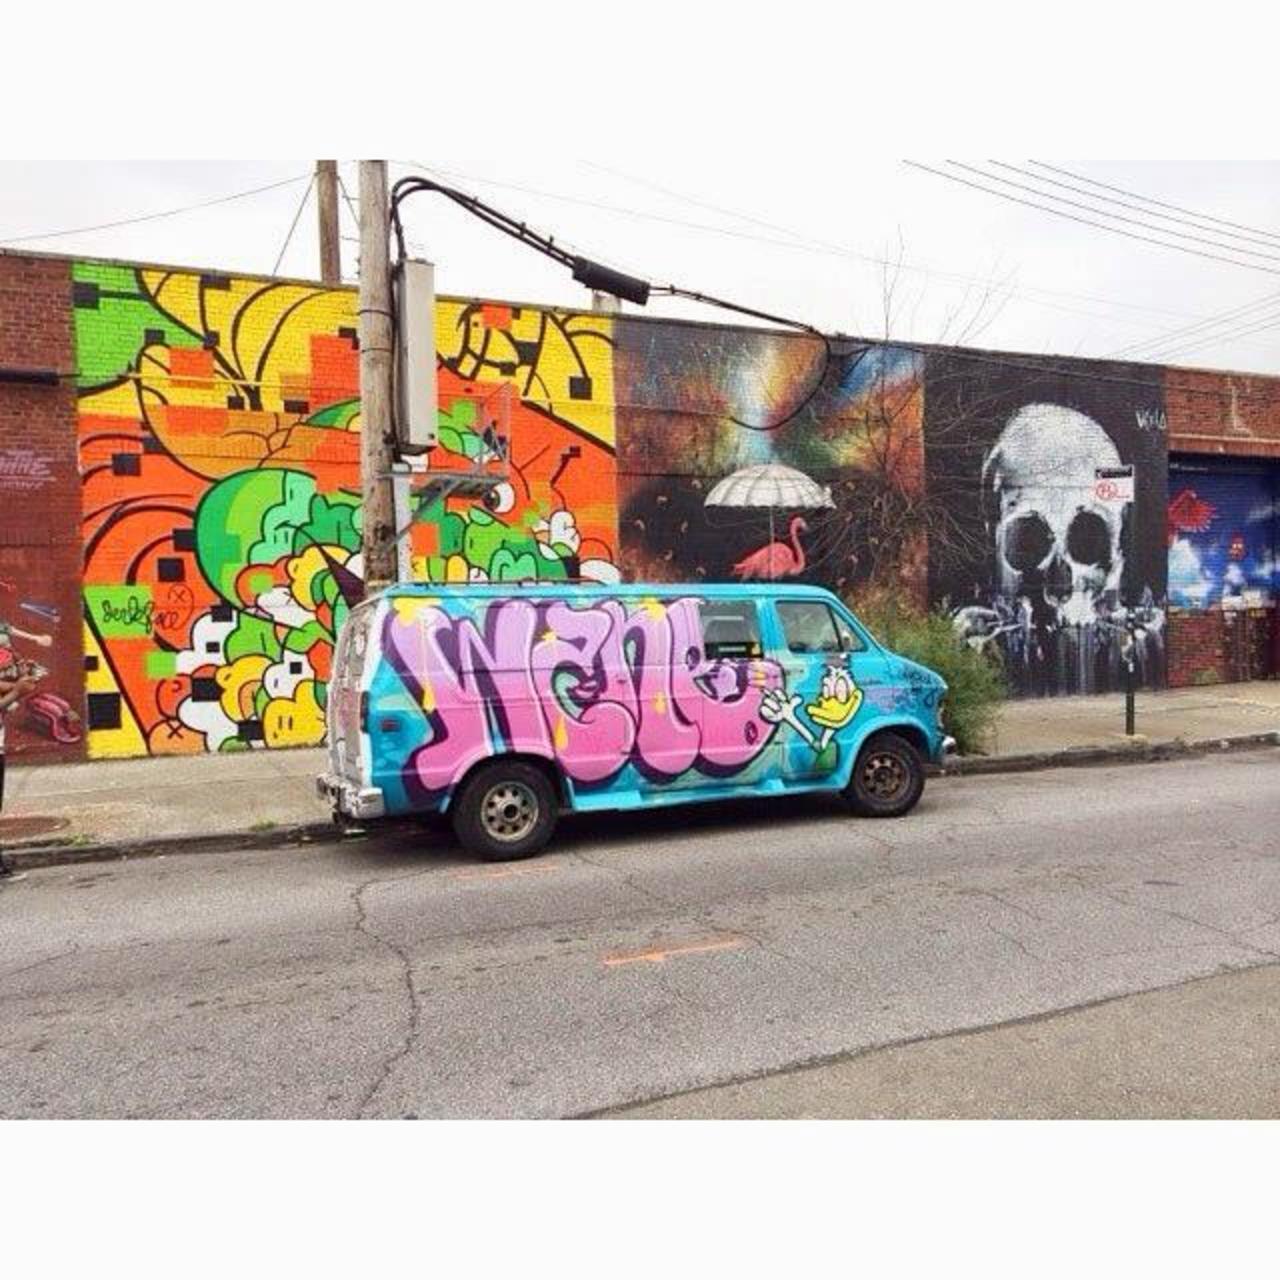 I saw this van in #brooklyn . Does anyone know of the #artist ? #streetart #graffiti http://t.co/pObkYedKdp